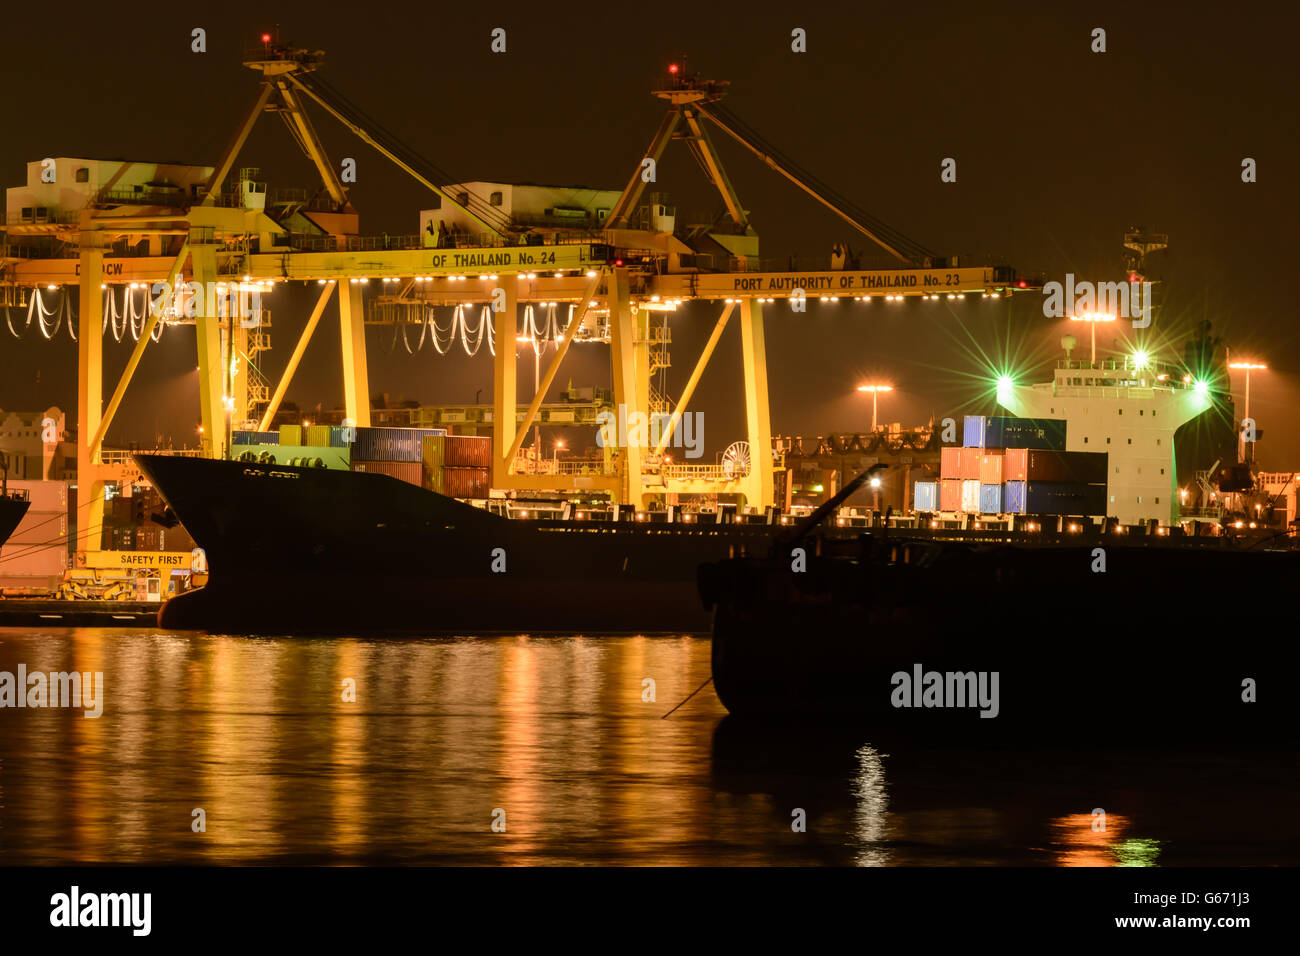 Cargo ship moving load at port Stock Photo